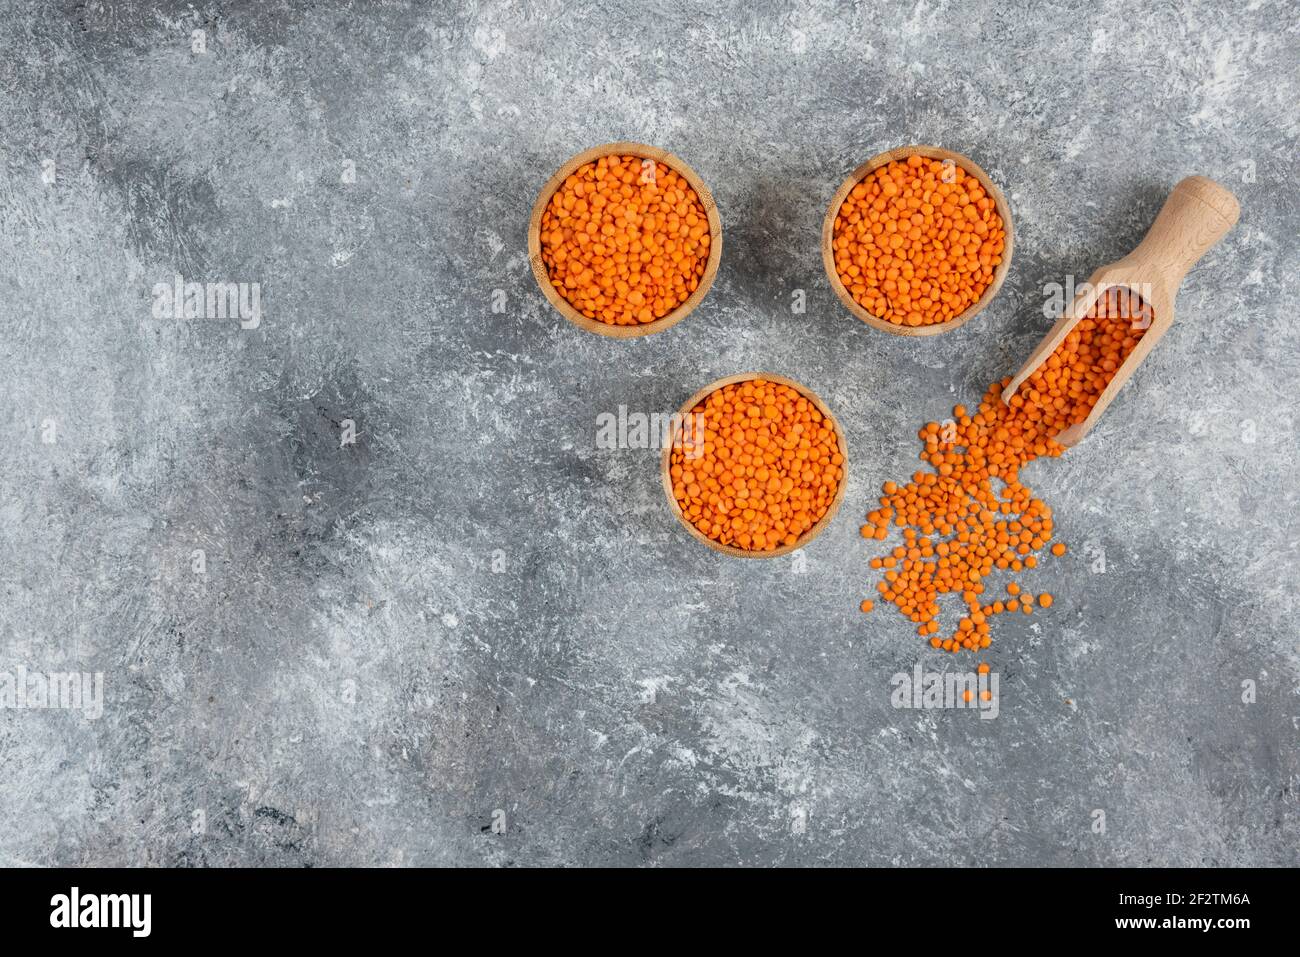 Wooden bowls of red raw lentils on marble background Stock Photo